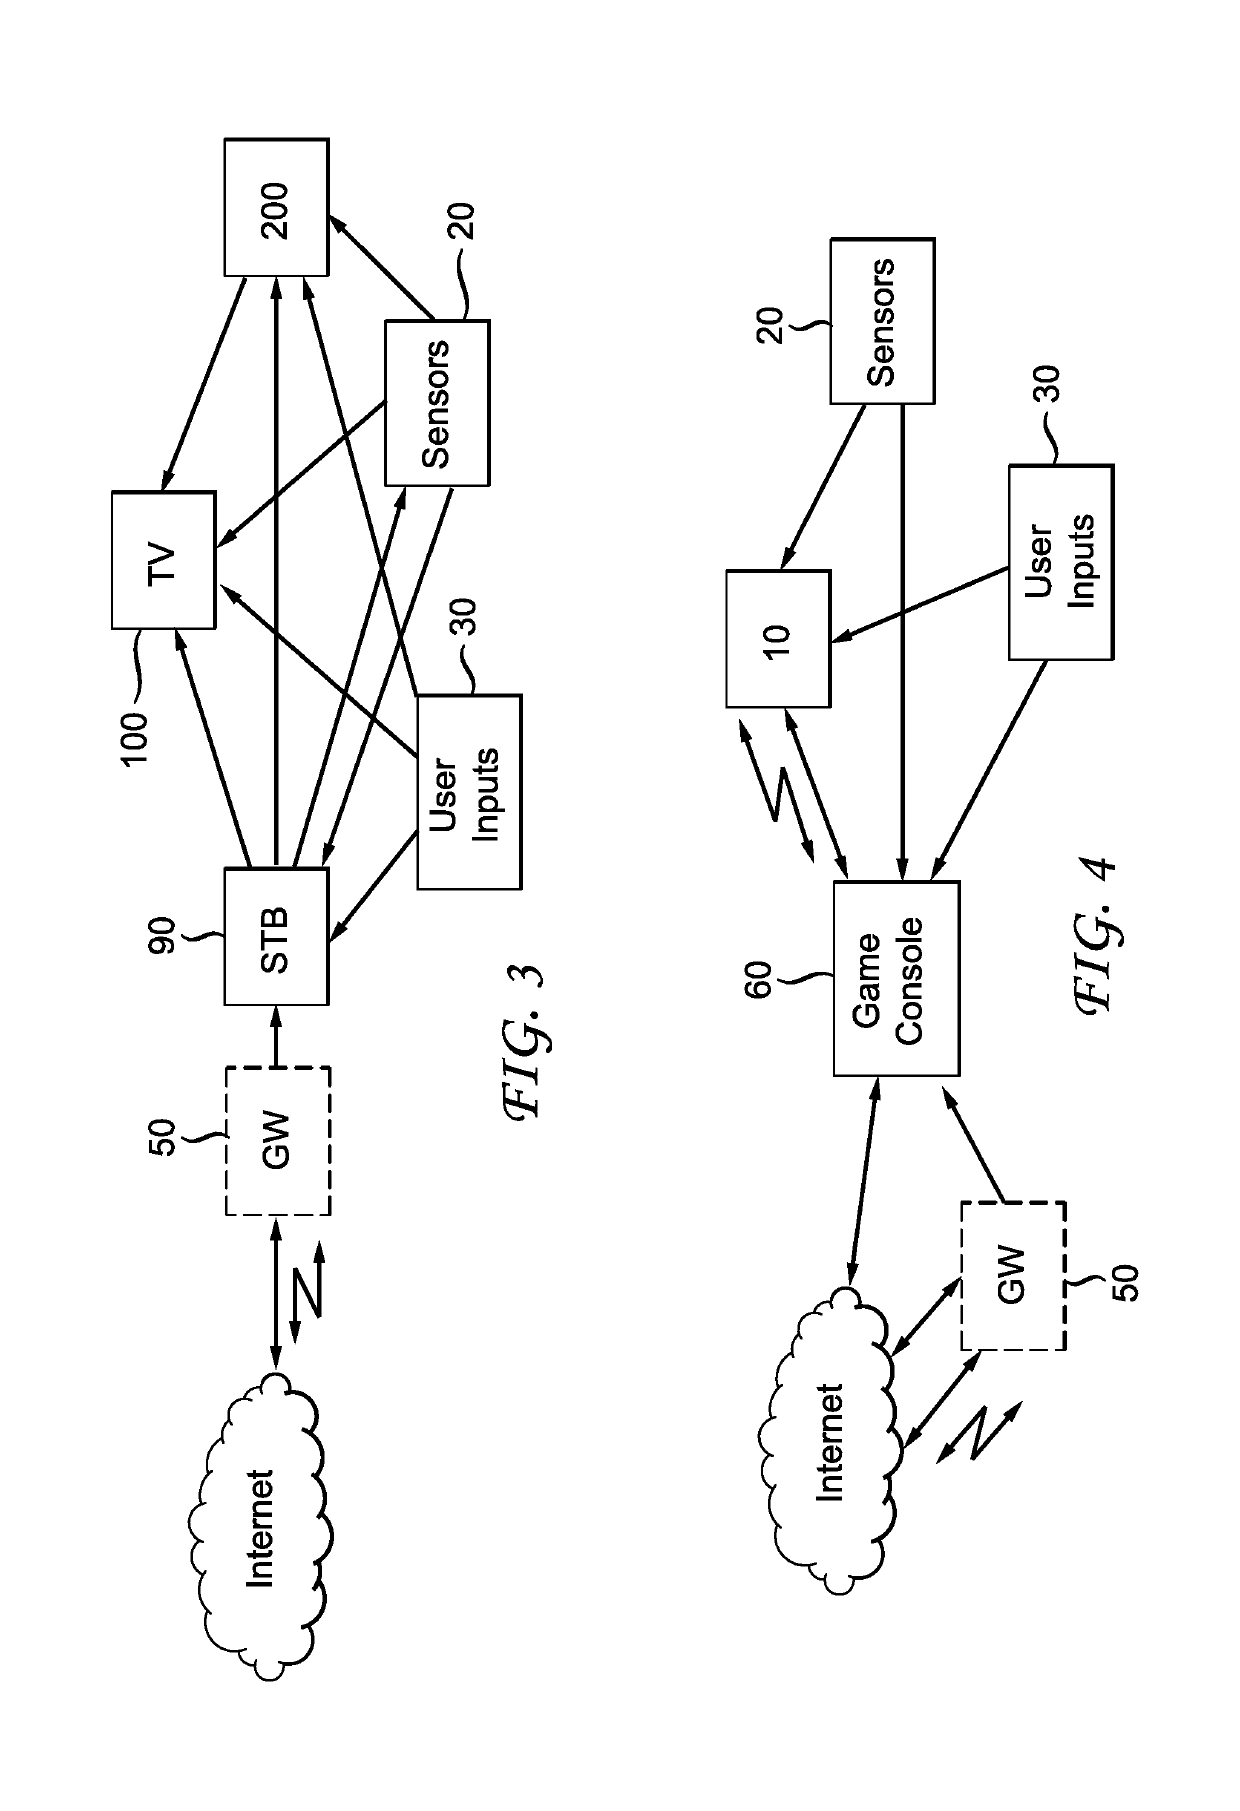 Method and apparatus for rectified motion compensation for omnidirectional videos